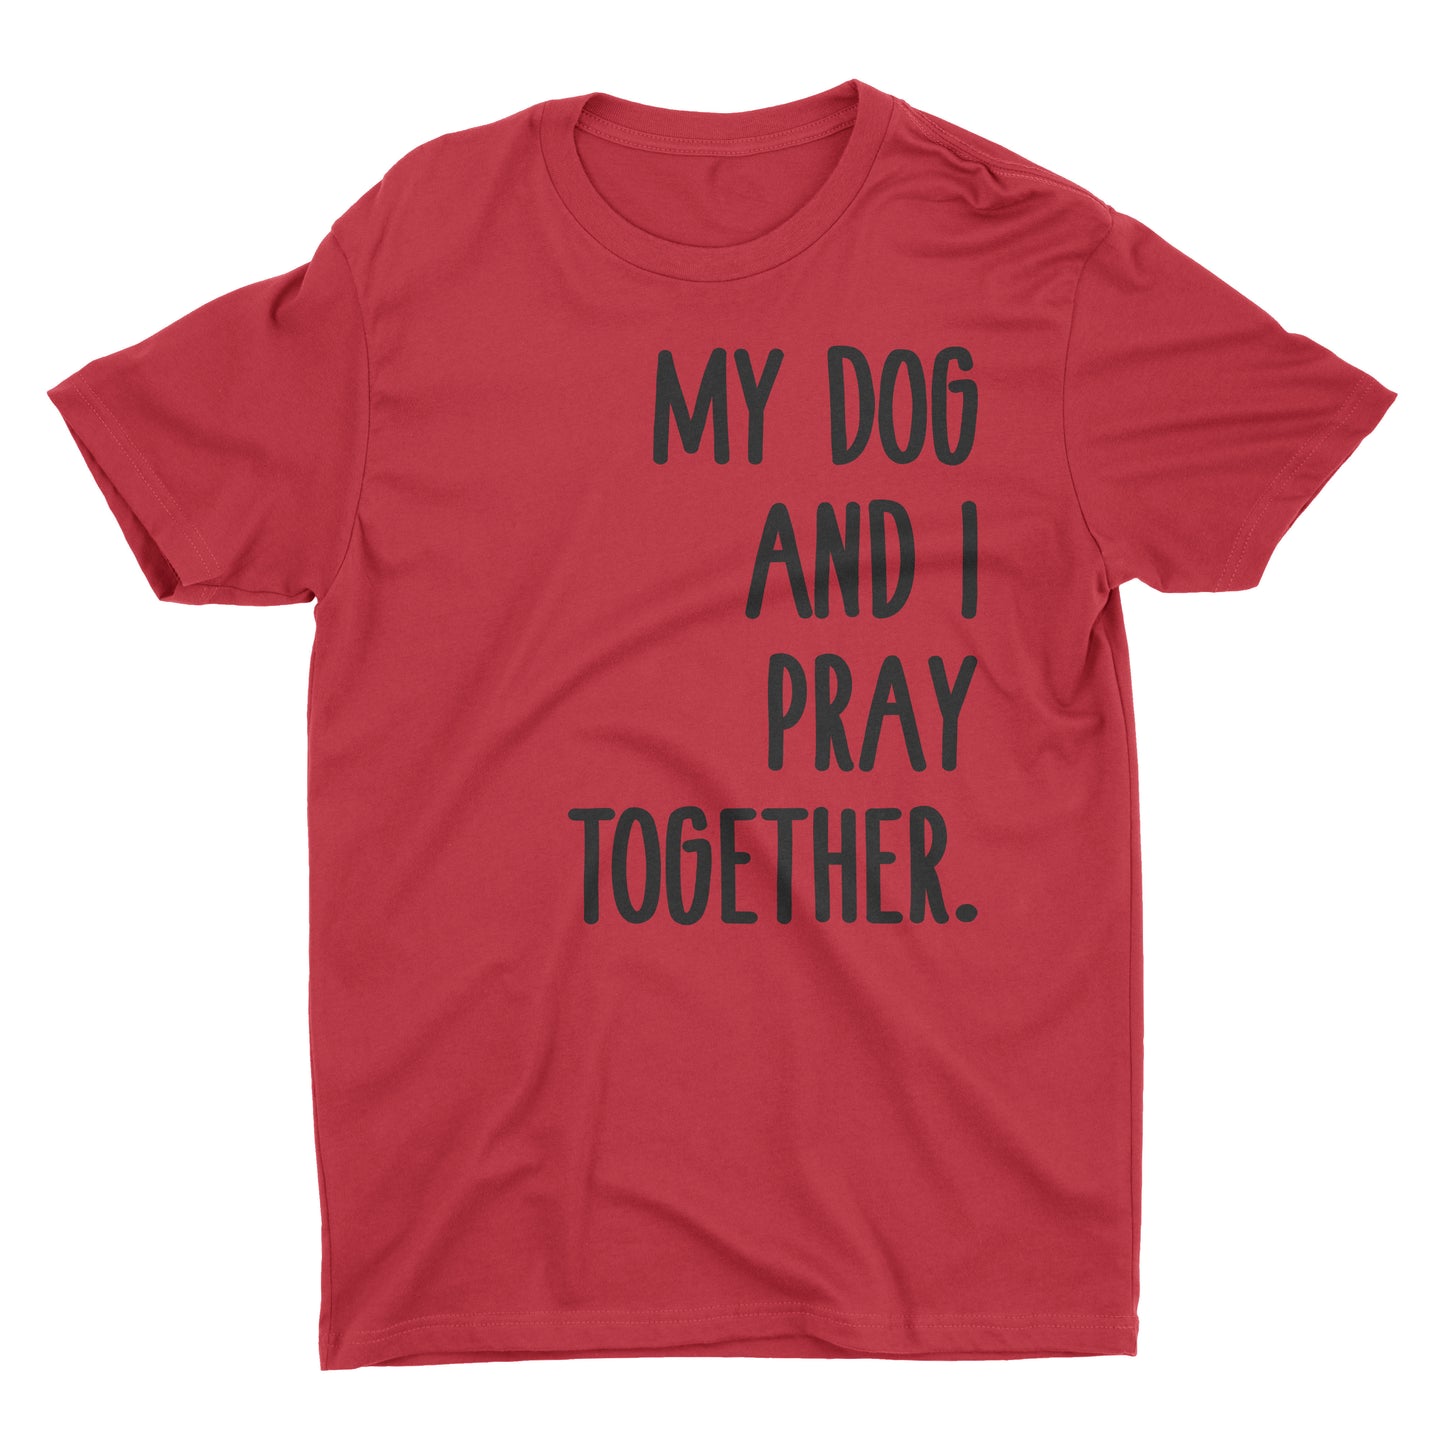 My Dog And I Pray Together.